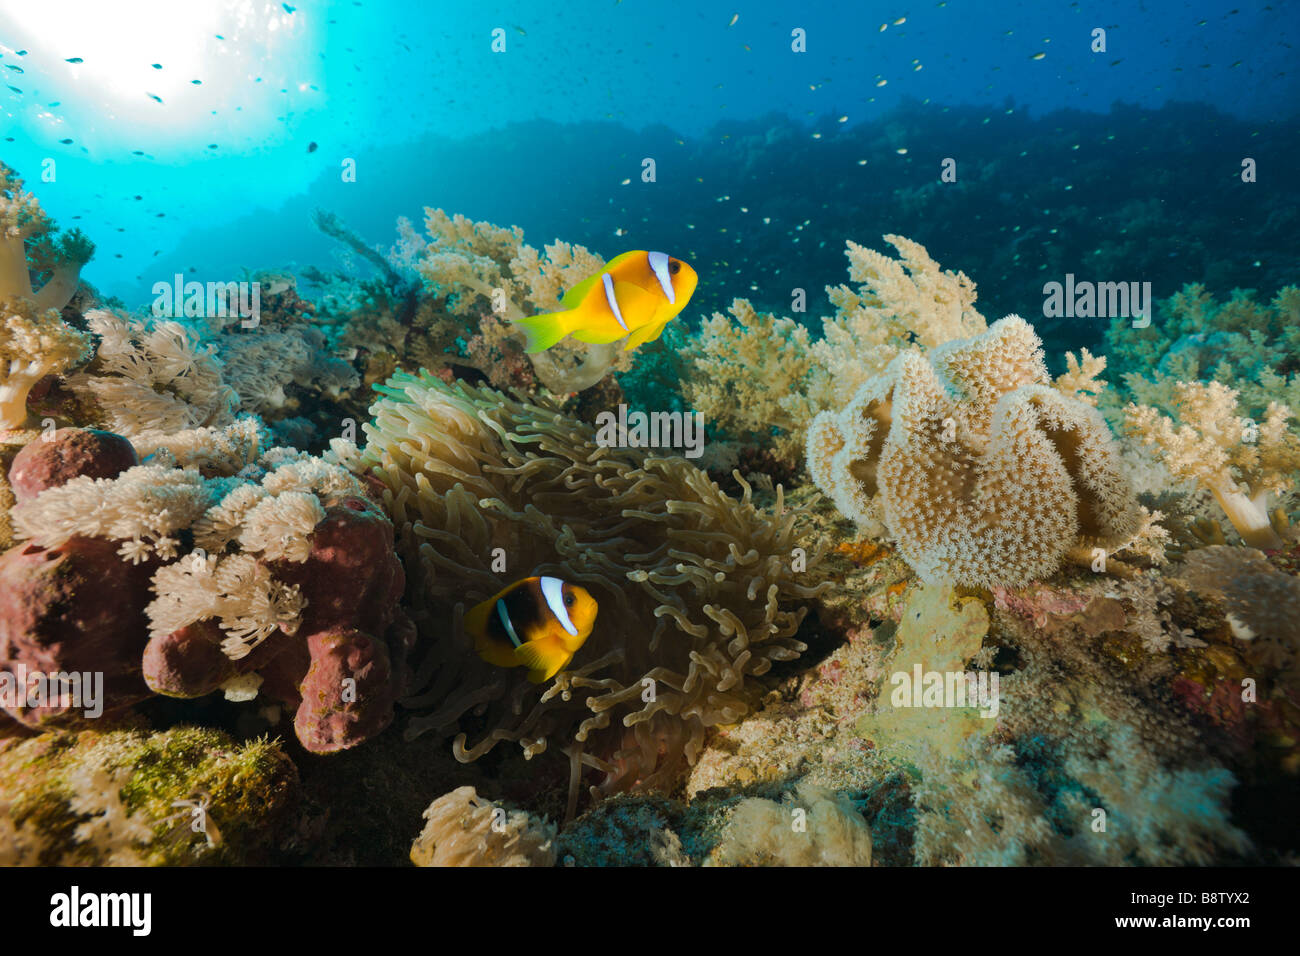 Pair of Red Sea Anemonefish Amphiprion bicinctus St Johns Reef Rotes Meer Egypt Stock Photo